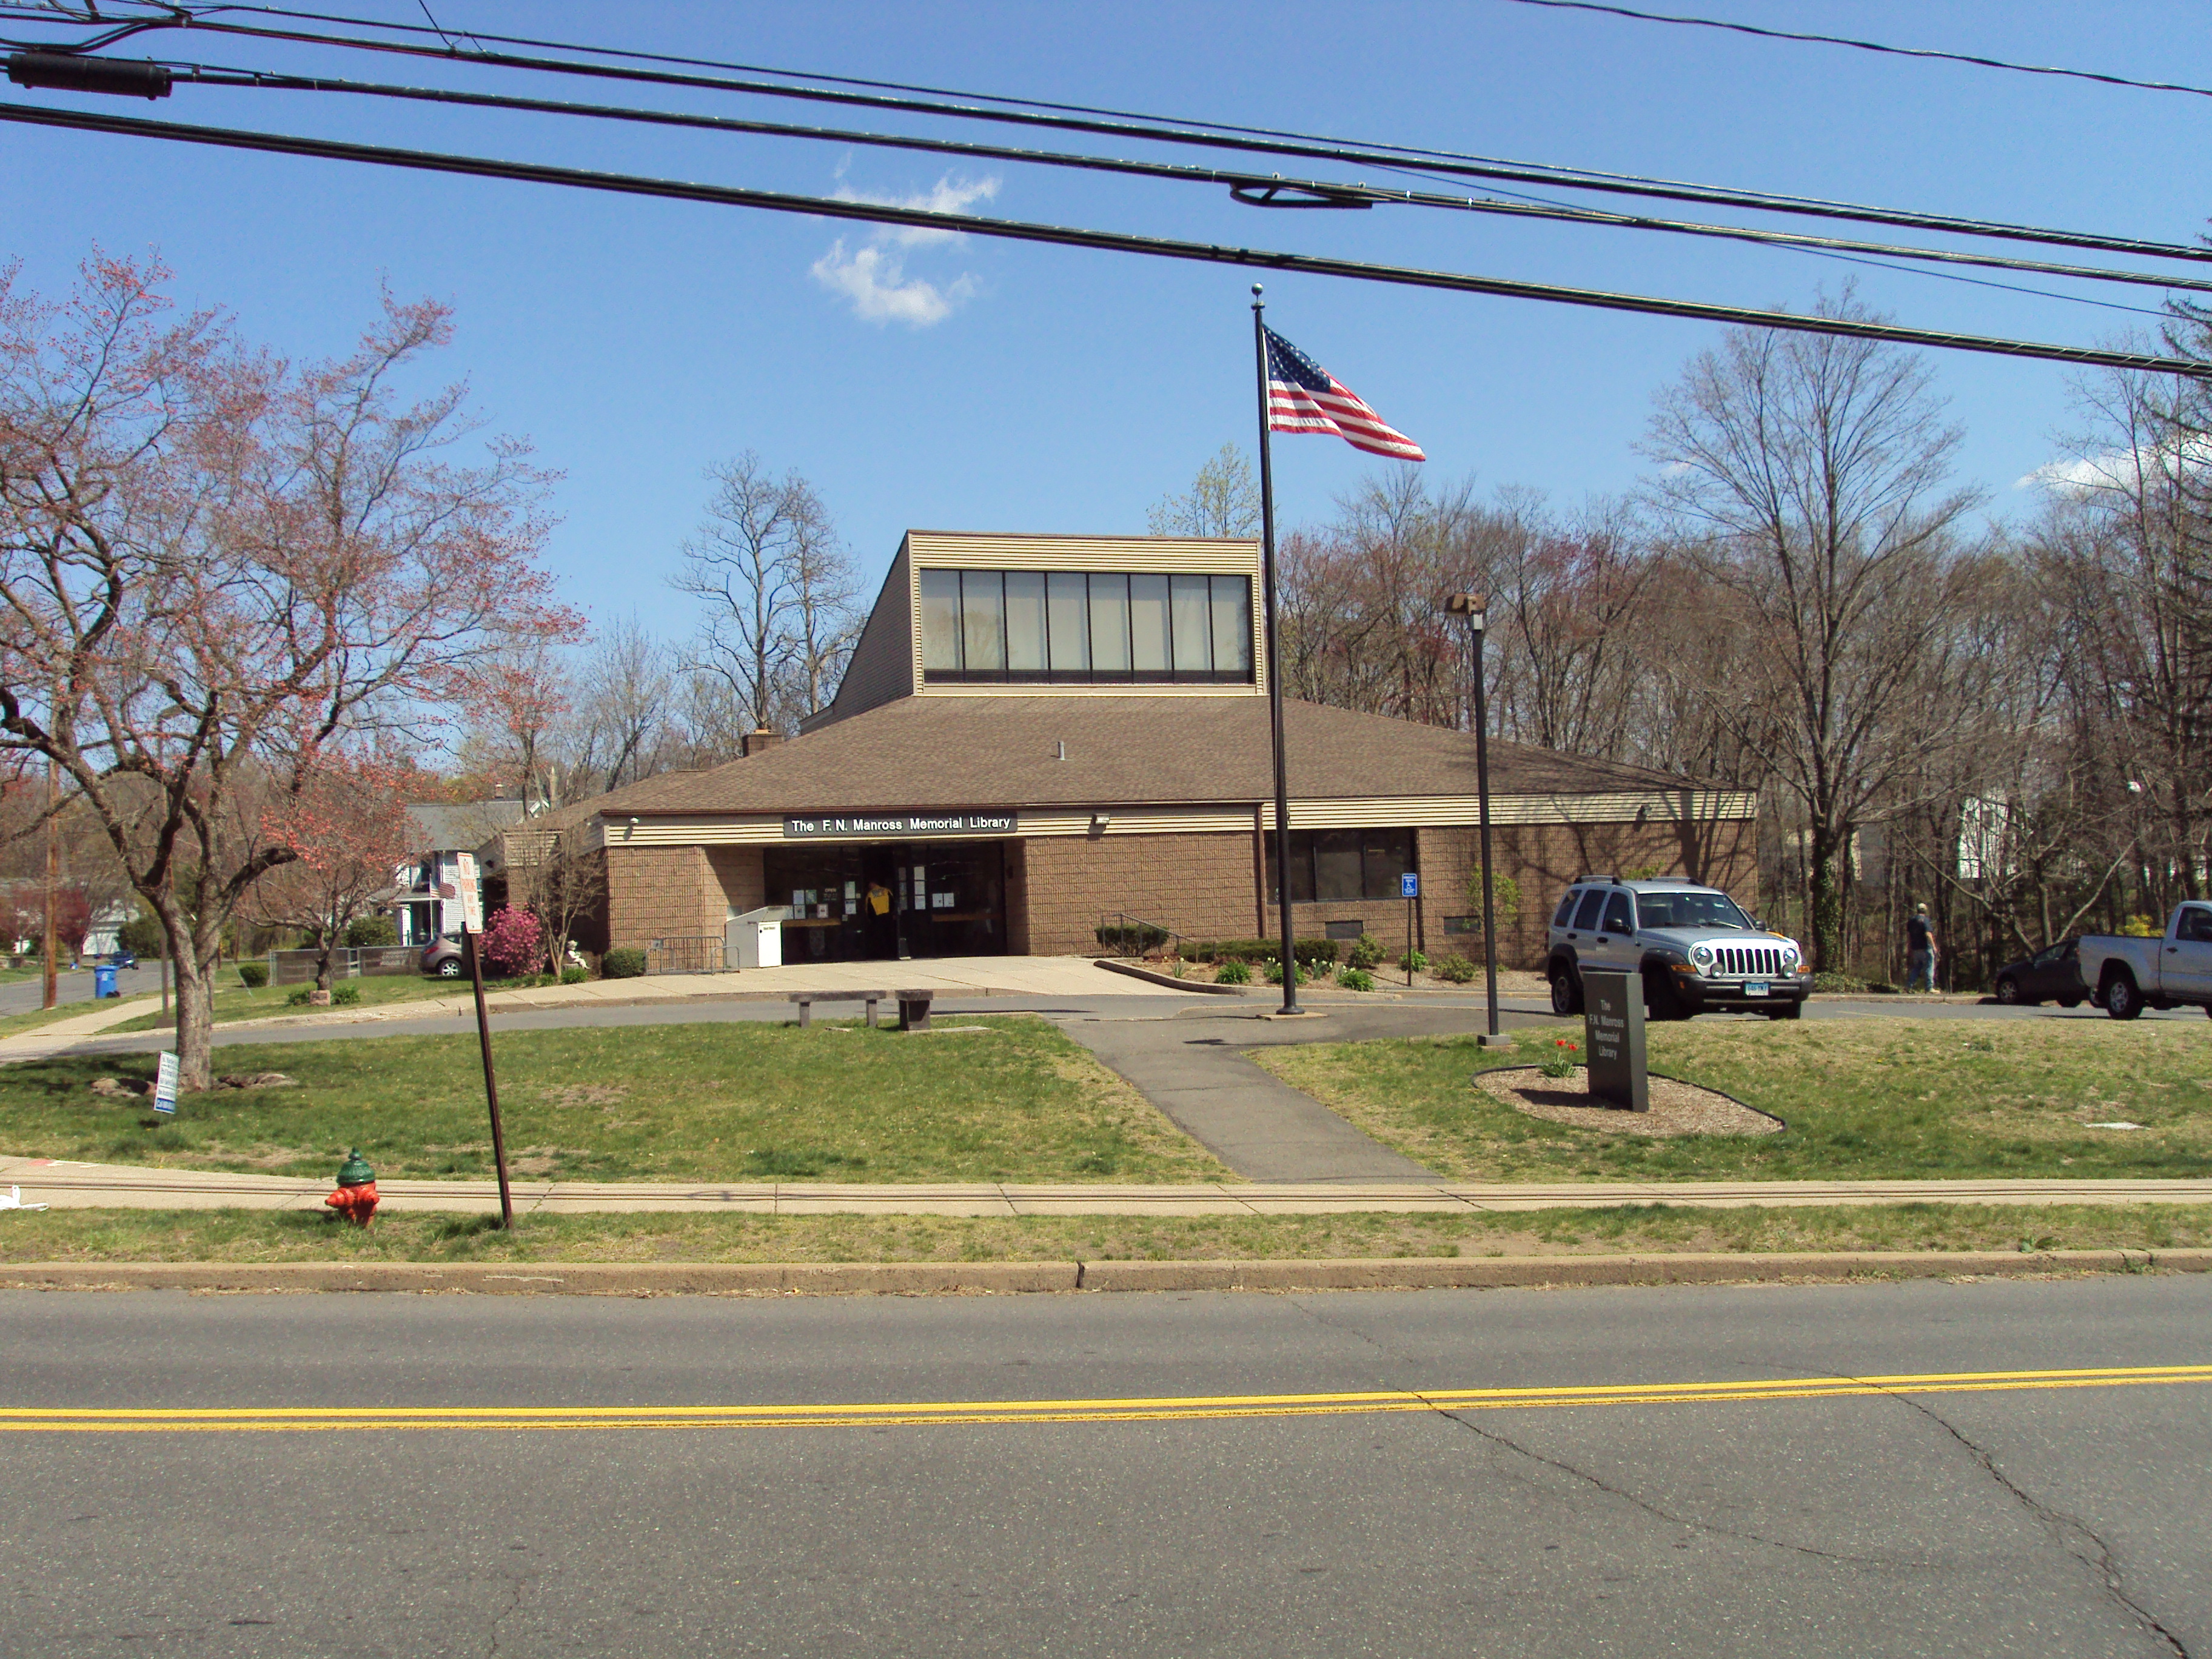 Library | Bristol, CT - Official Website